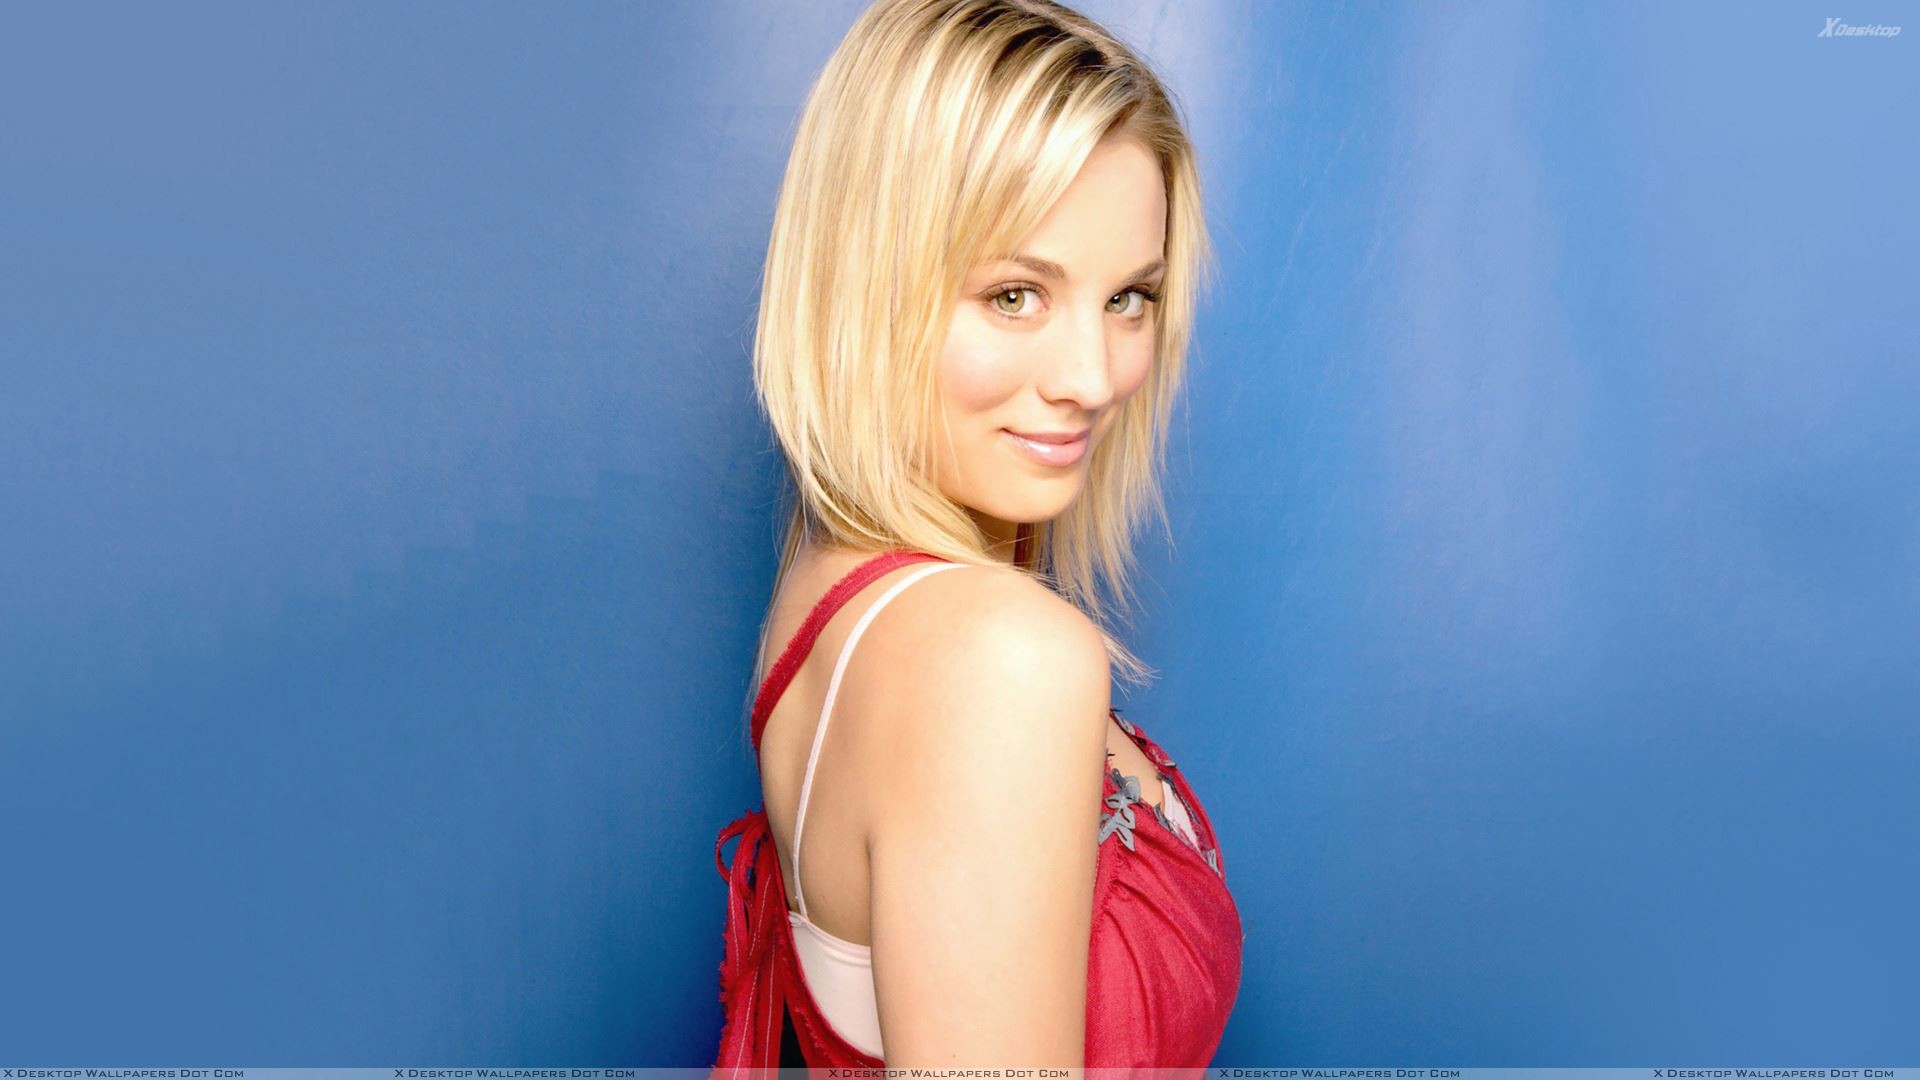 1920x1080 You are viewing wallpaper titled "Kaley Cuoco ...